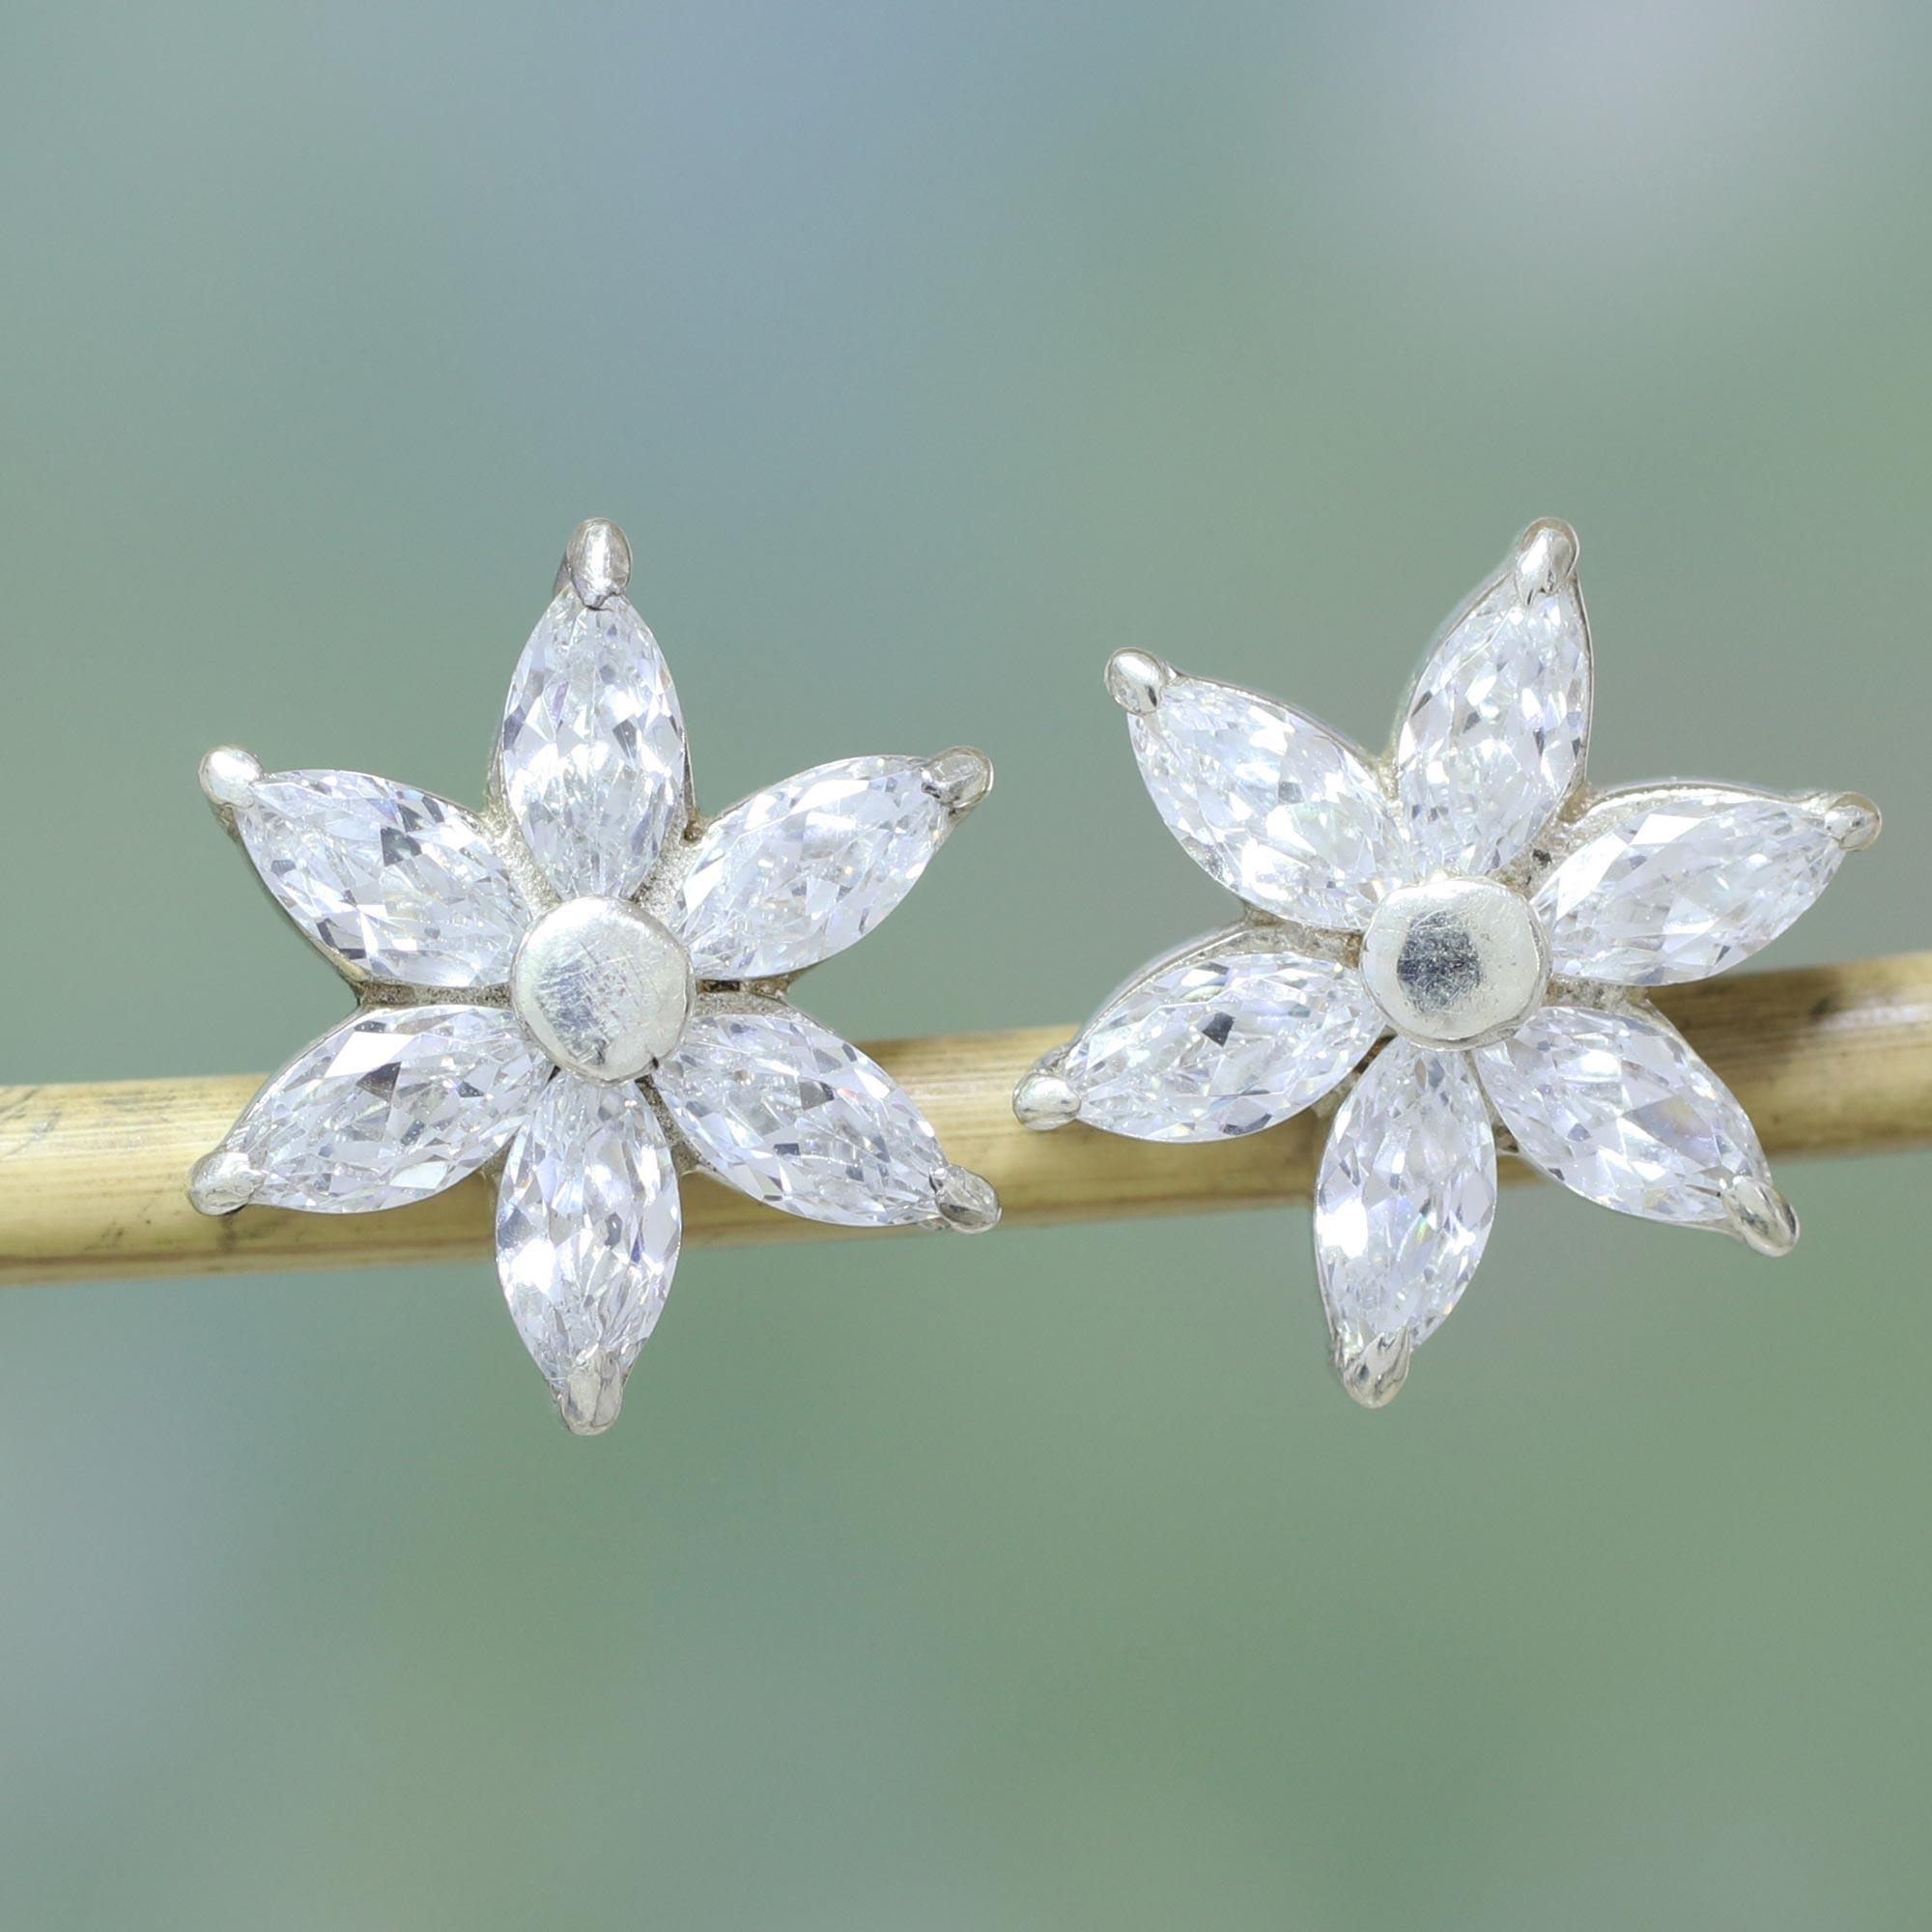 Sparkling Stud Earrings with Cubic Zirconia from India, 'Snow Blossom' Gemstone Complement to Skin Tone 